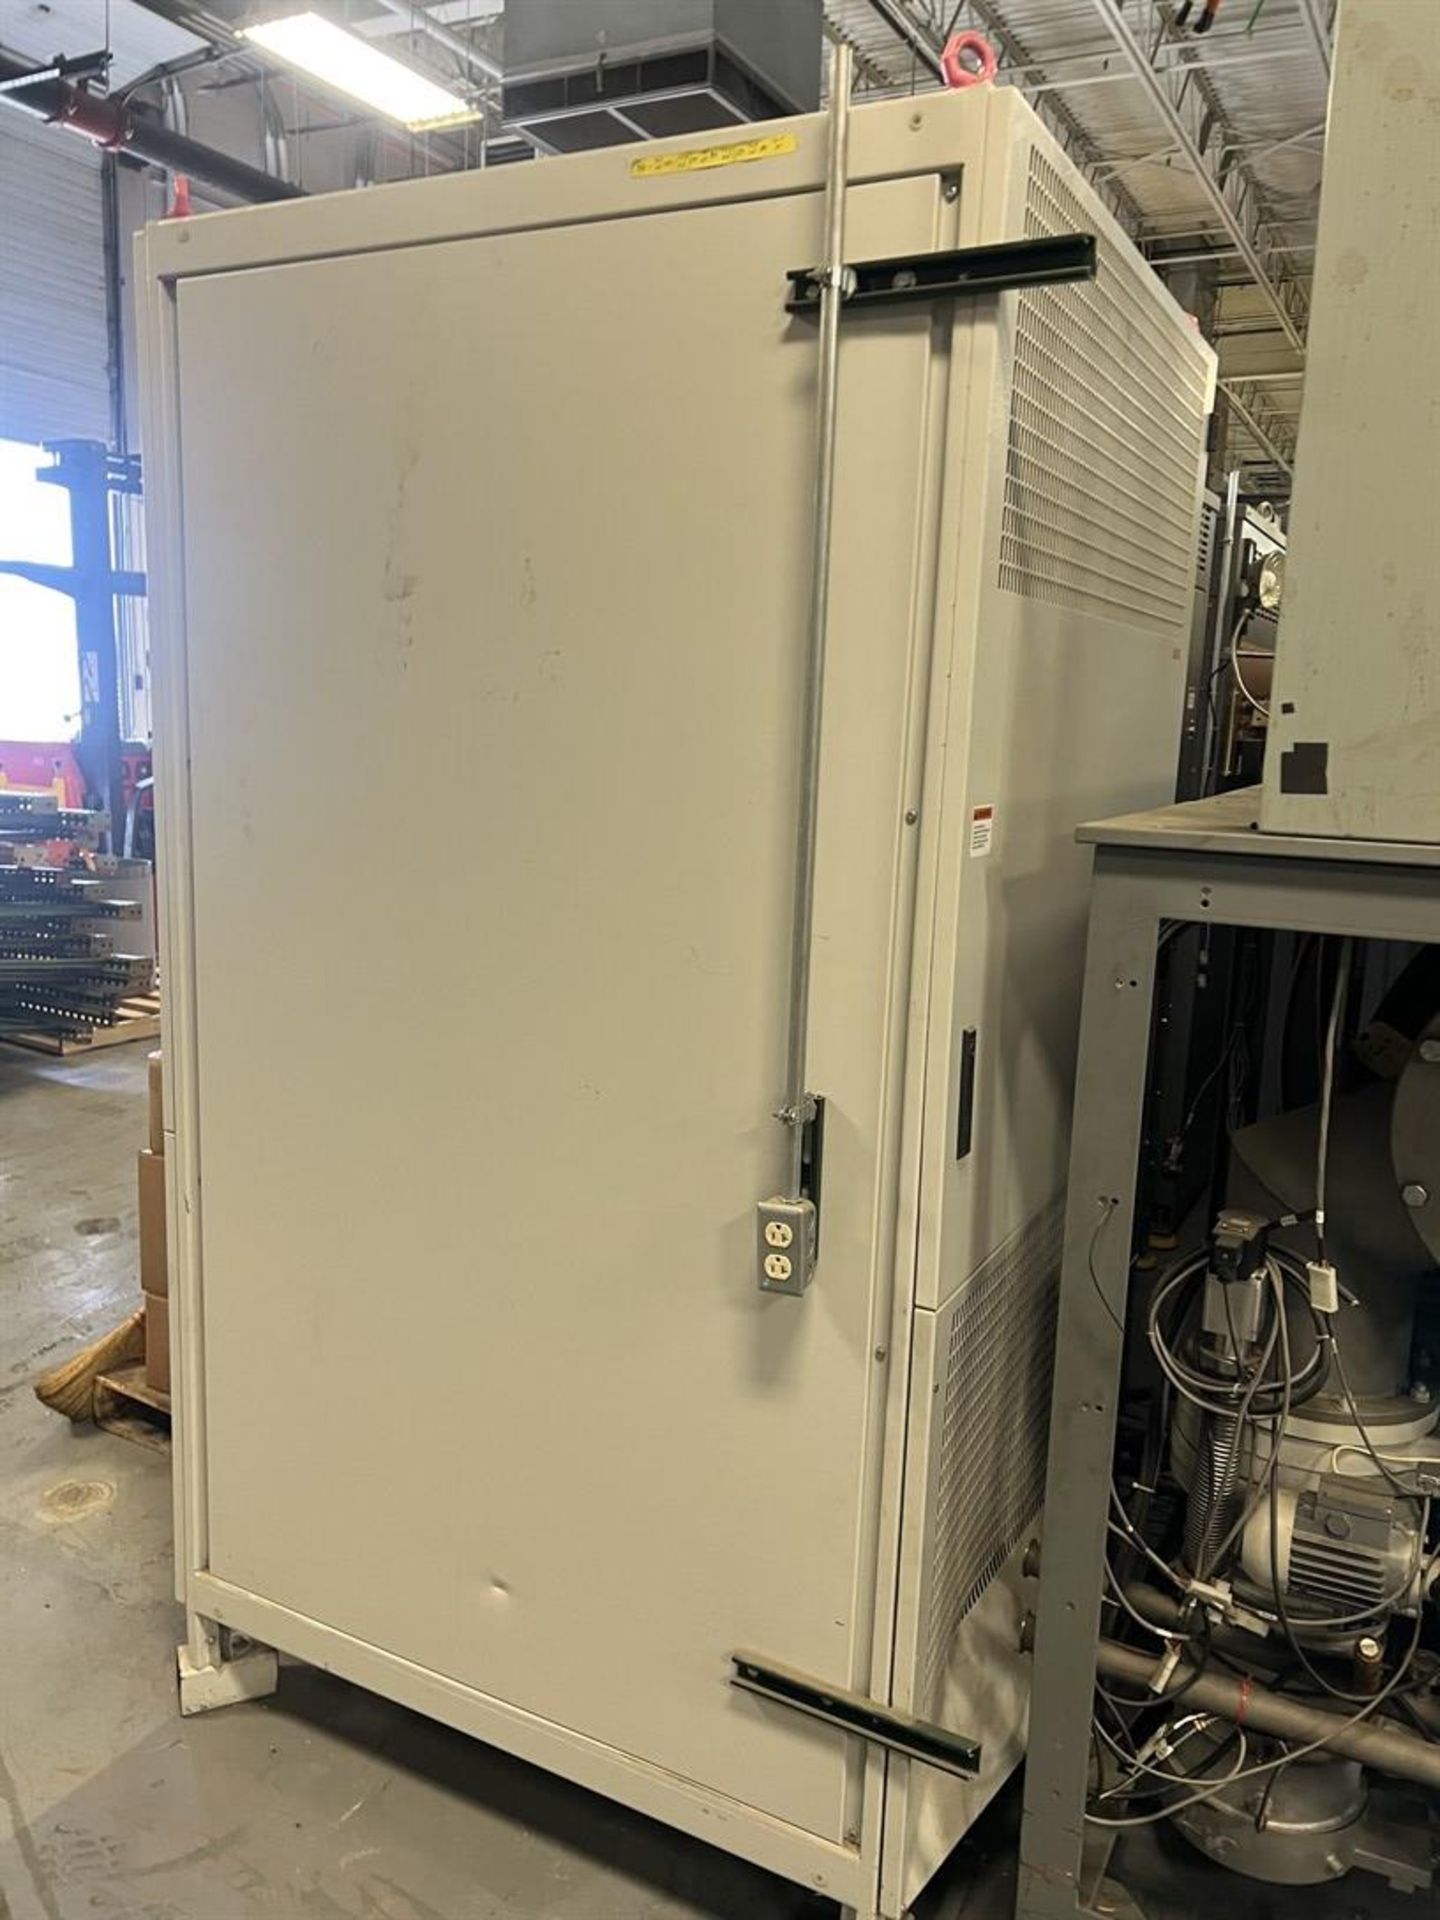 83 KG KYROPOULOS Growth Furnace w/ WARNER 135 KW SCR Controlled DC Power Supply, 16-Day Process - Image 4 of 4